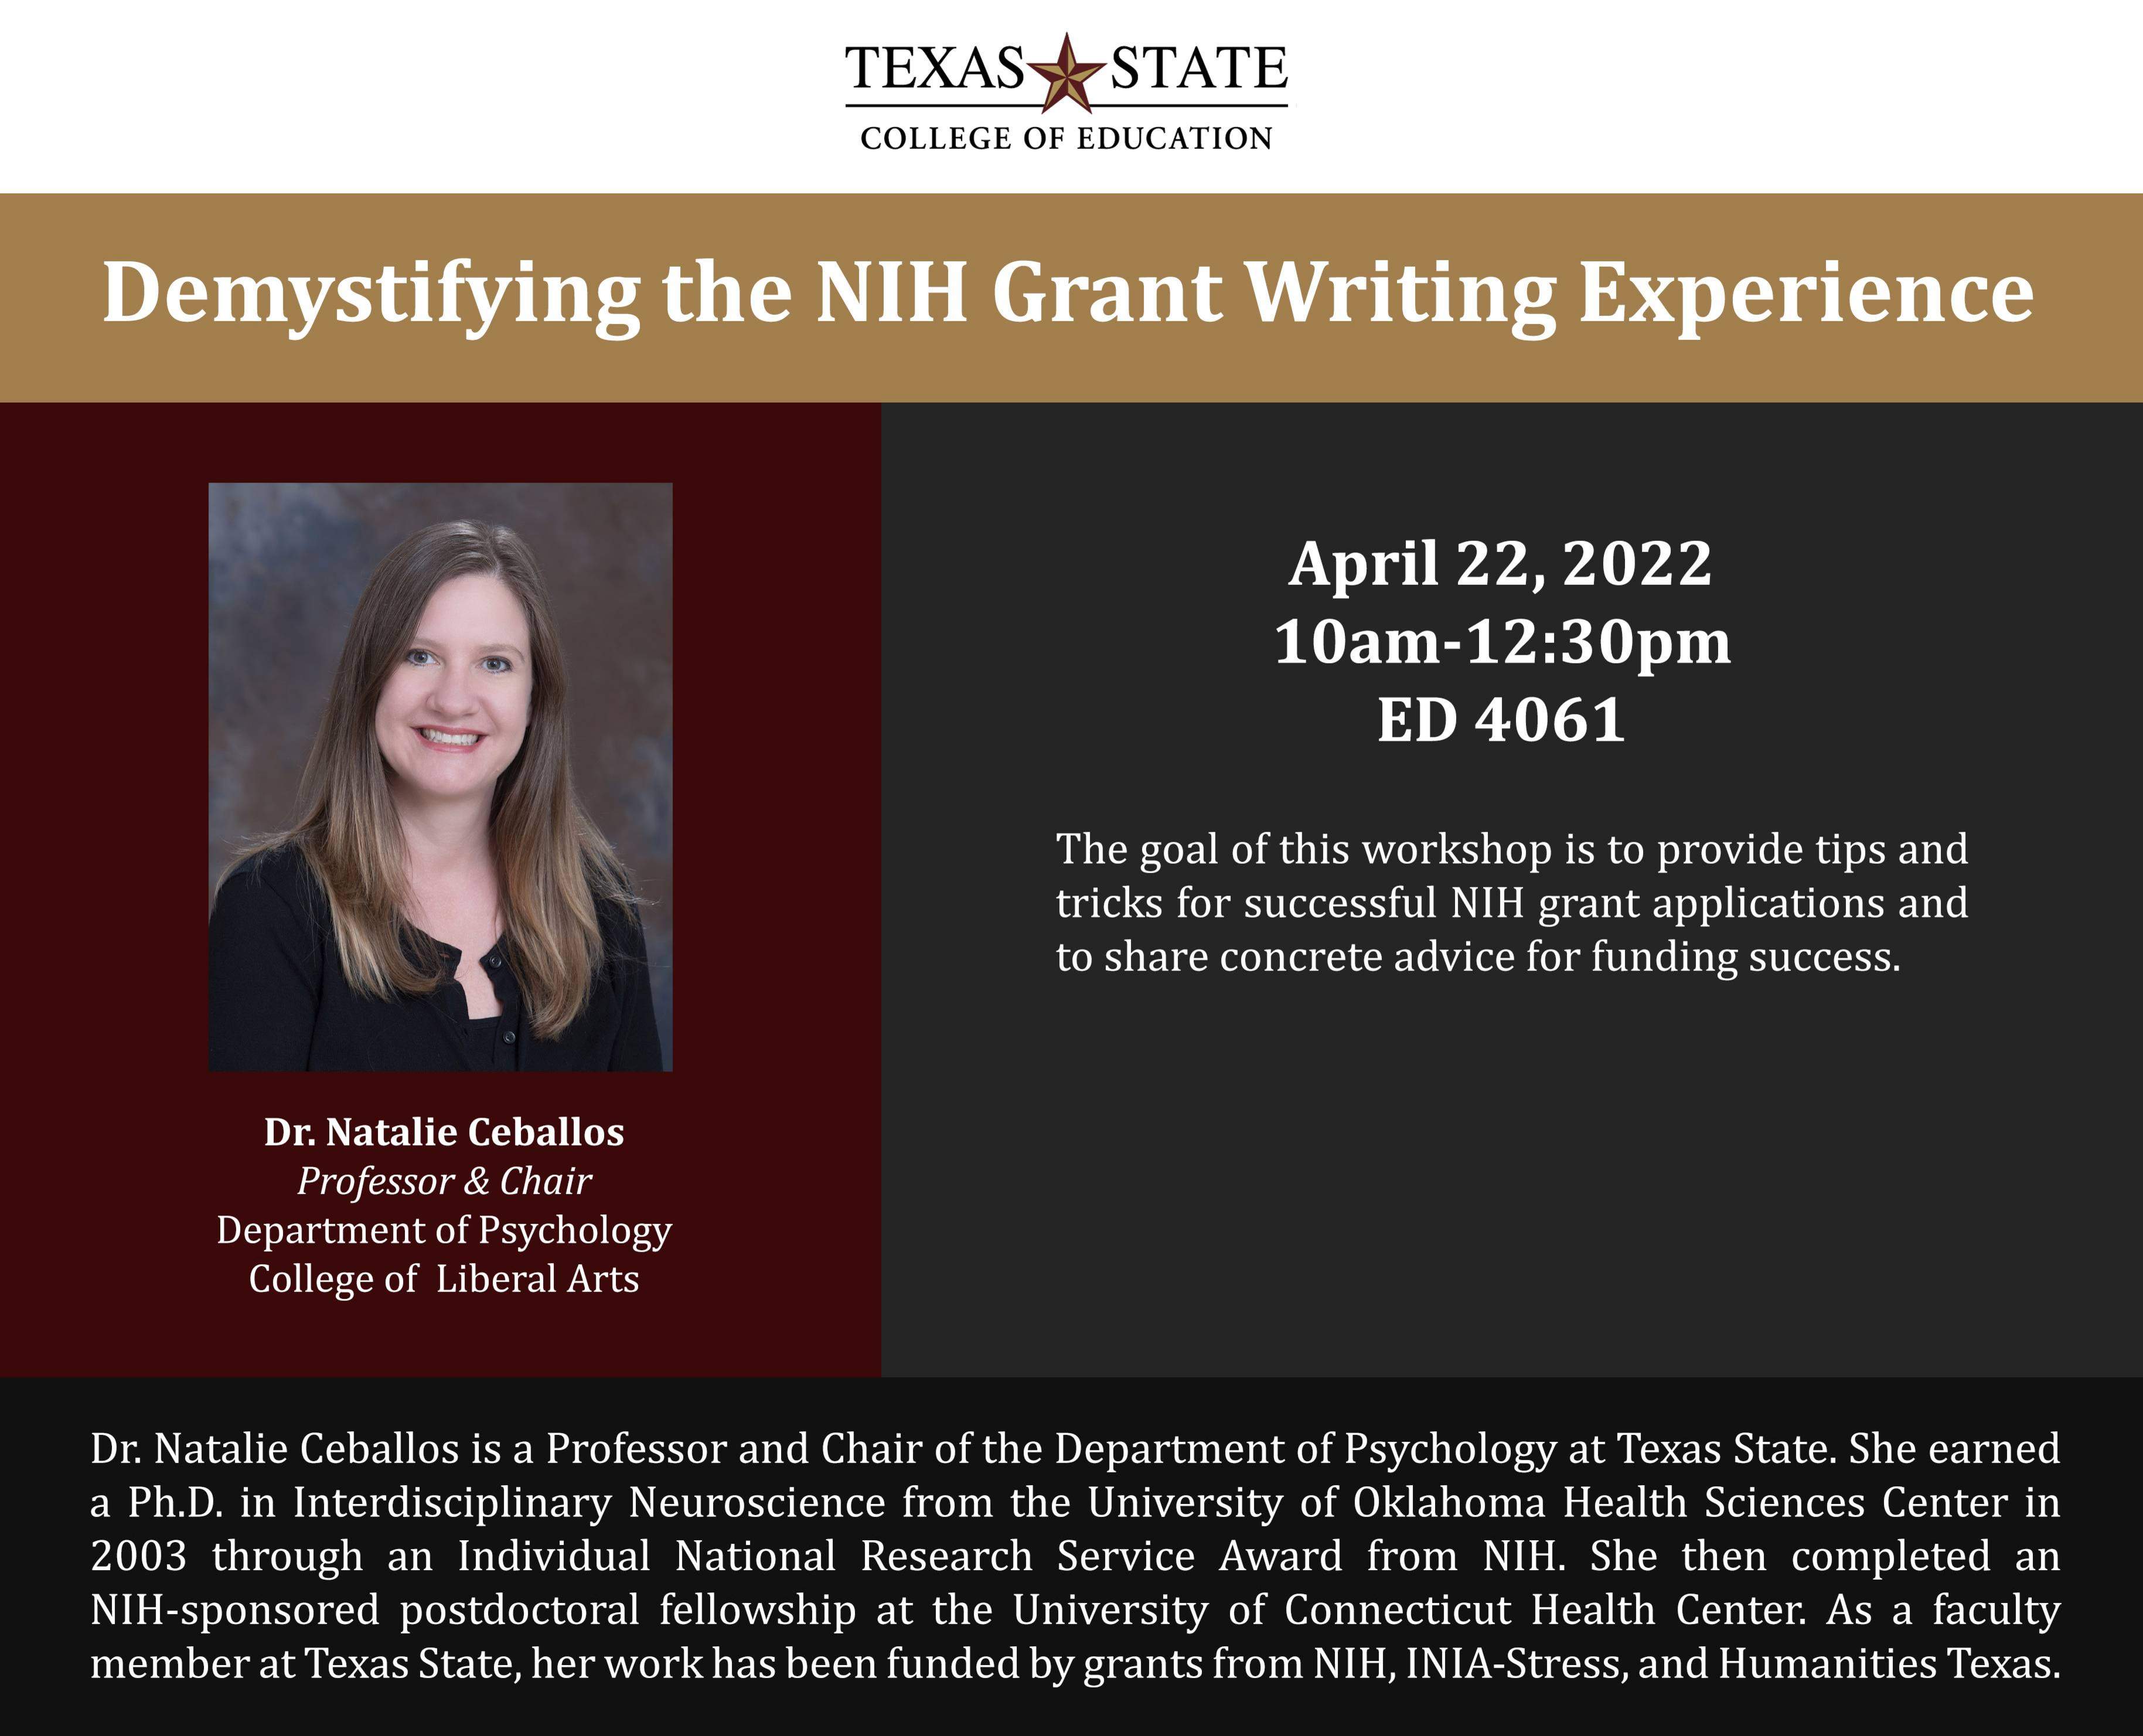 Dr. Natalie Ceballos Funded Research Lecture